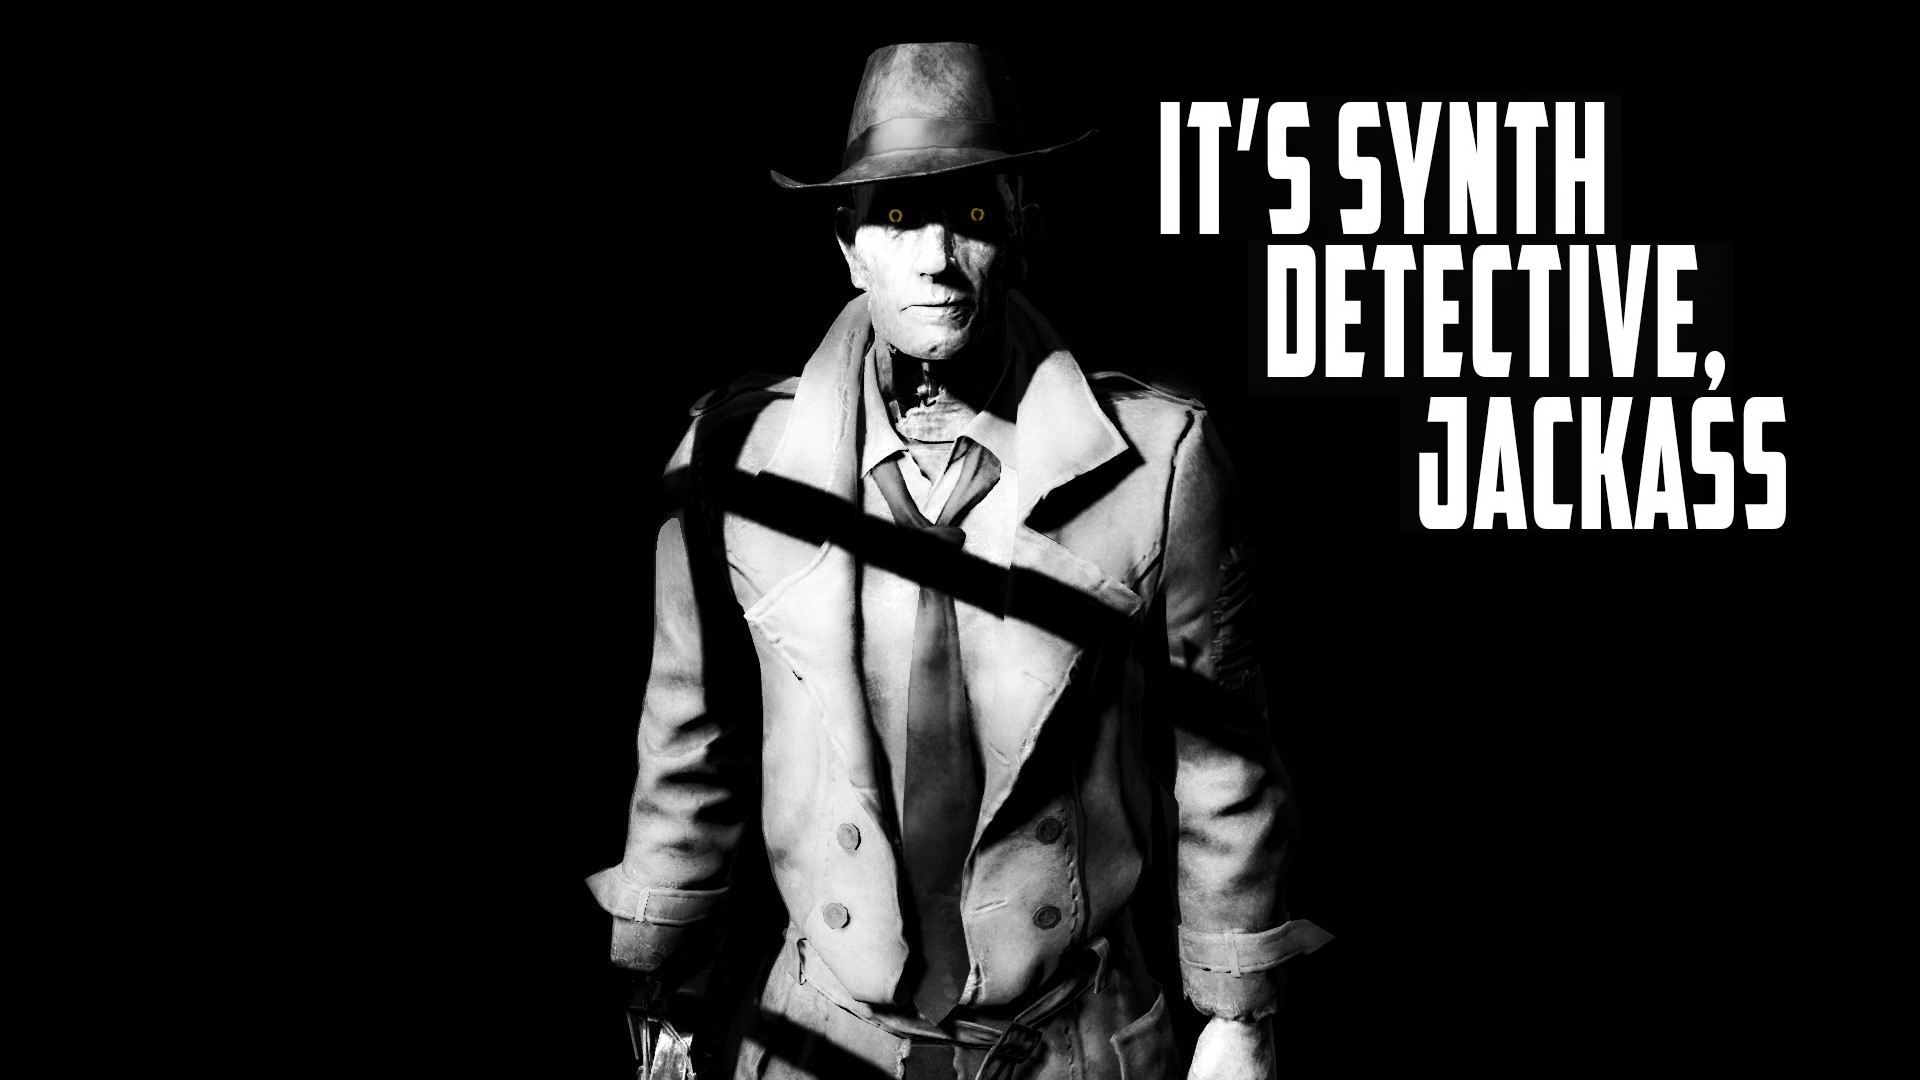 Fallout 4 Nick Valentine Quote Monochrome Fallout Synth Bethesda Softworks 1920x1080